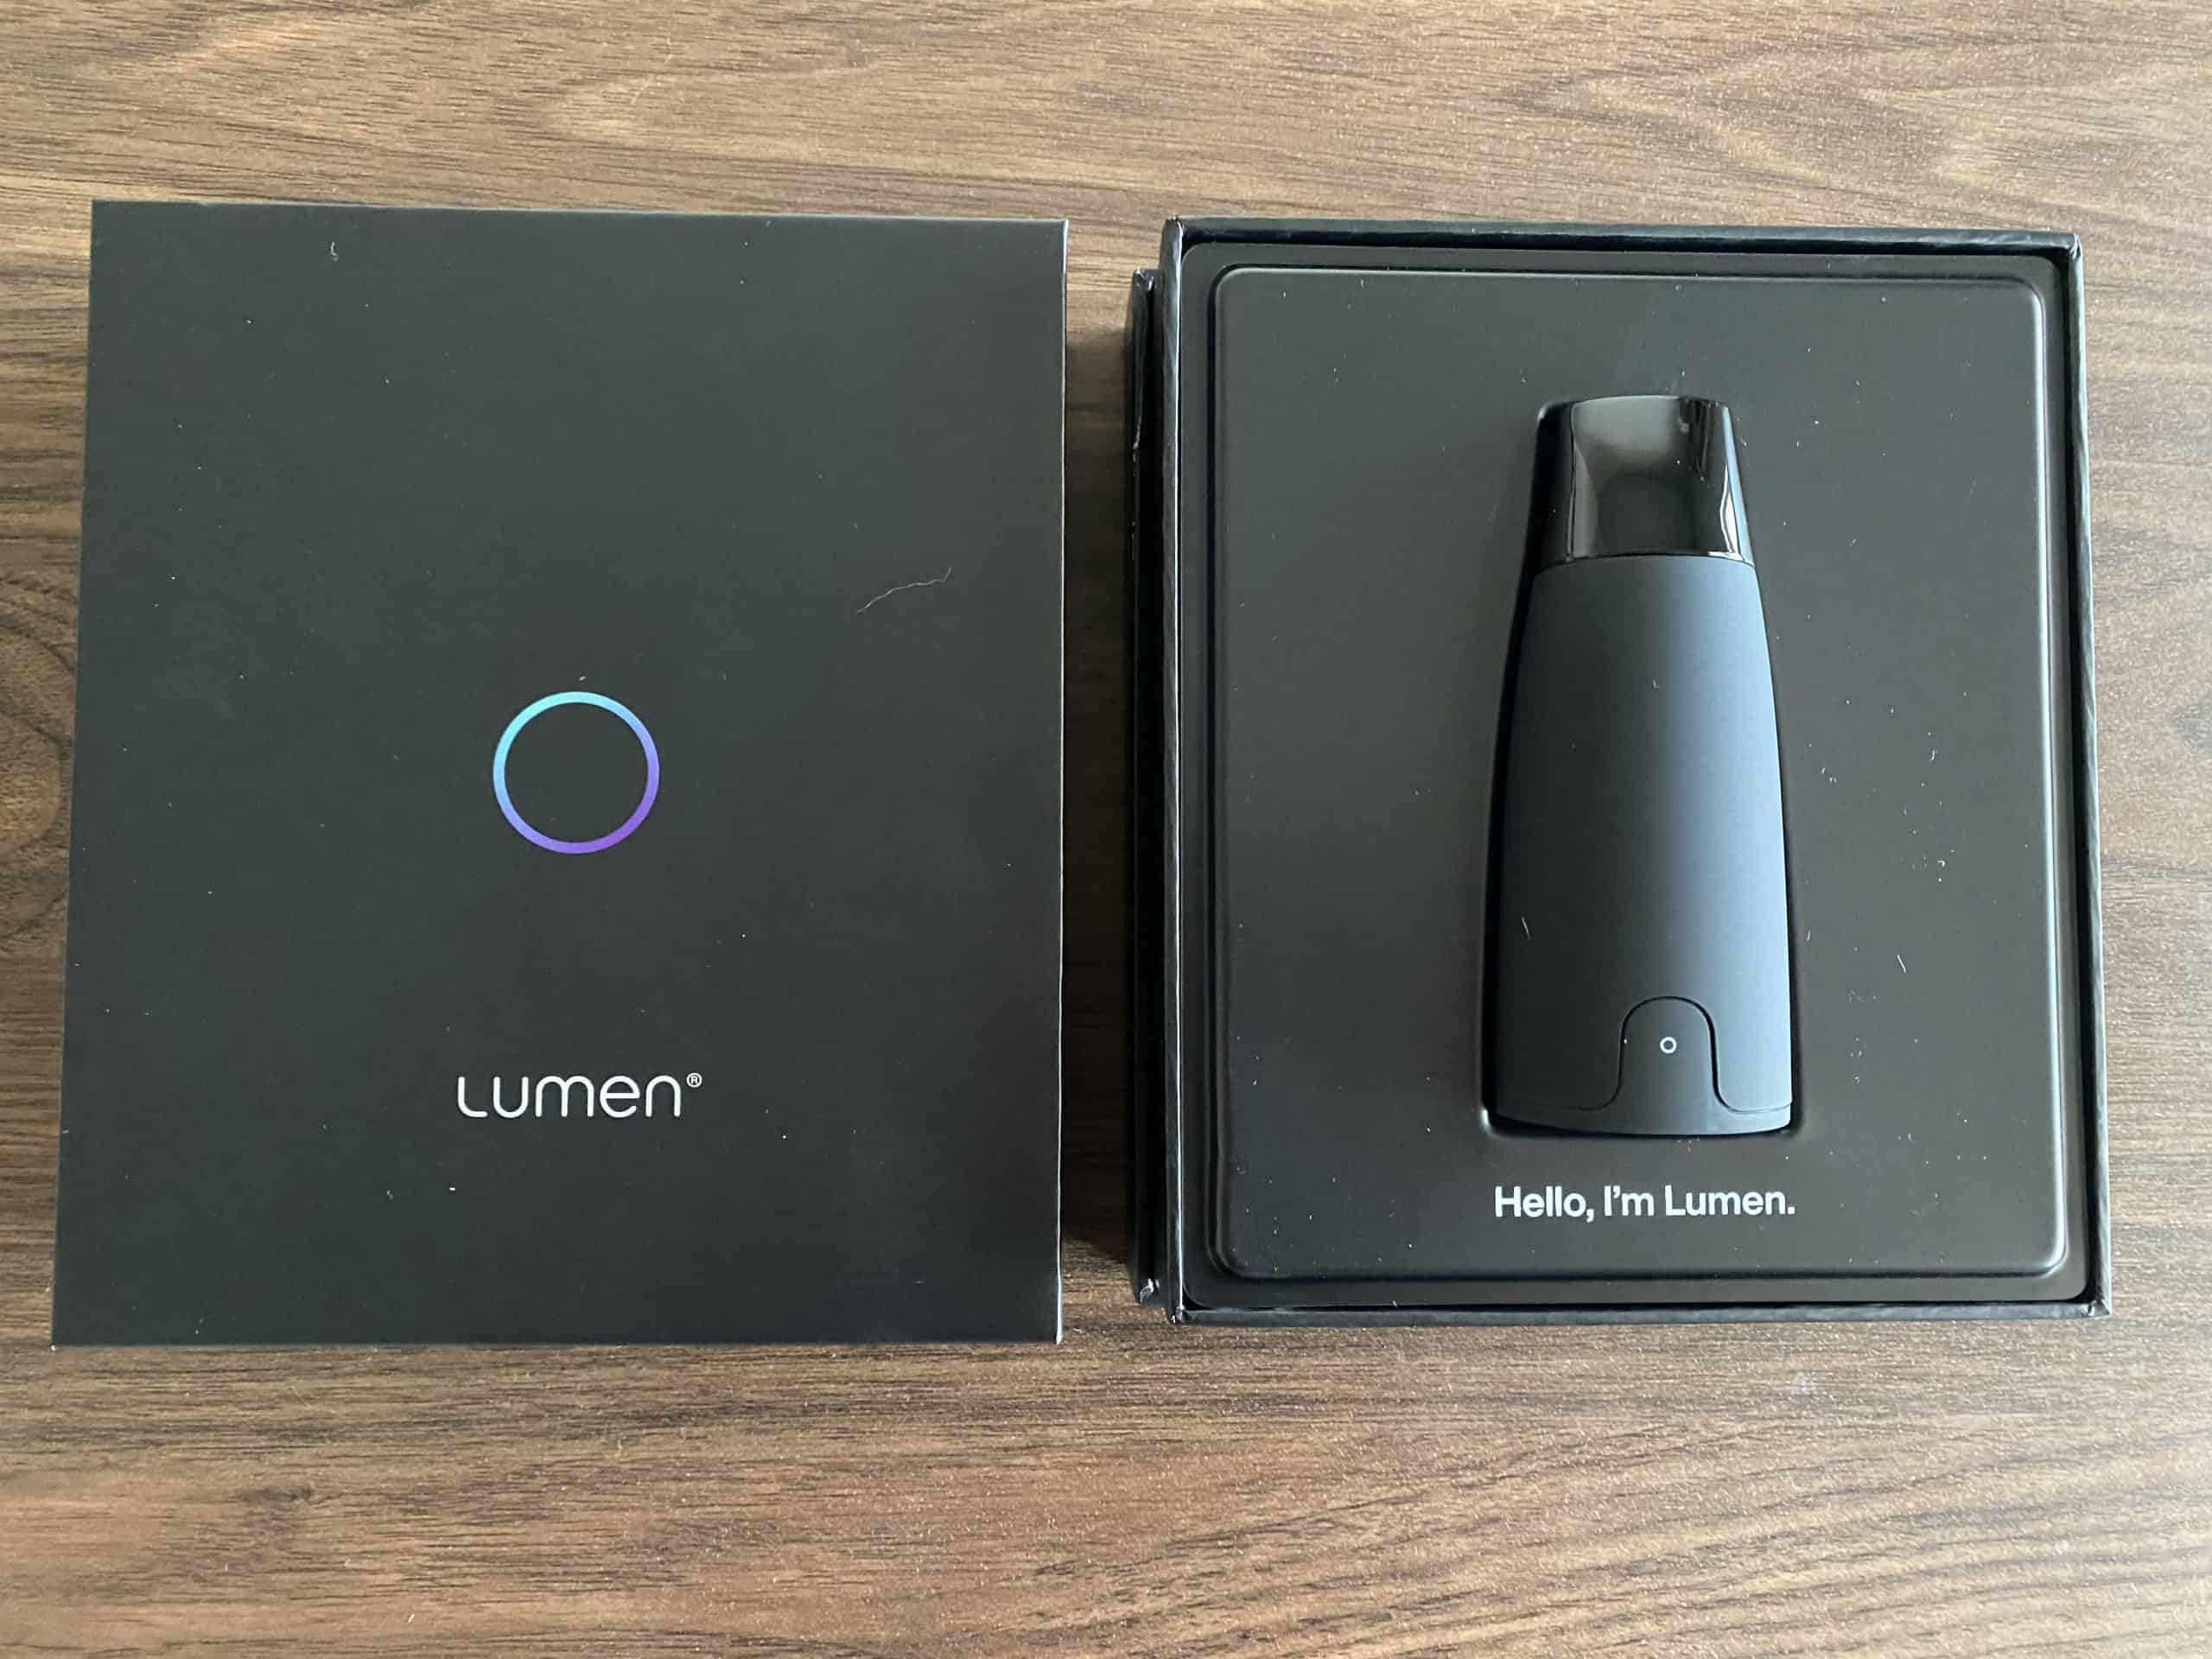 Does Lumen Work for Weight Loss? Plus 6 Other Lumen Reviews 2022